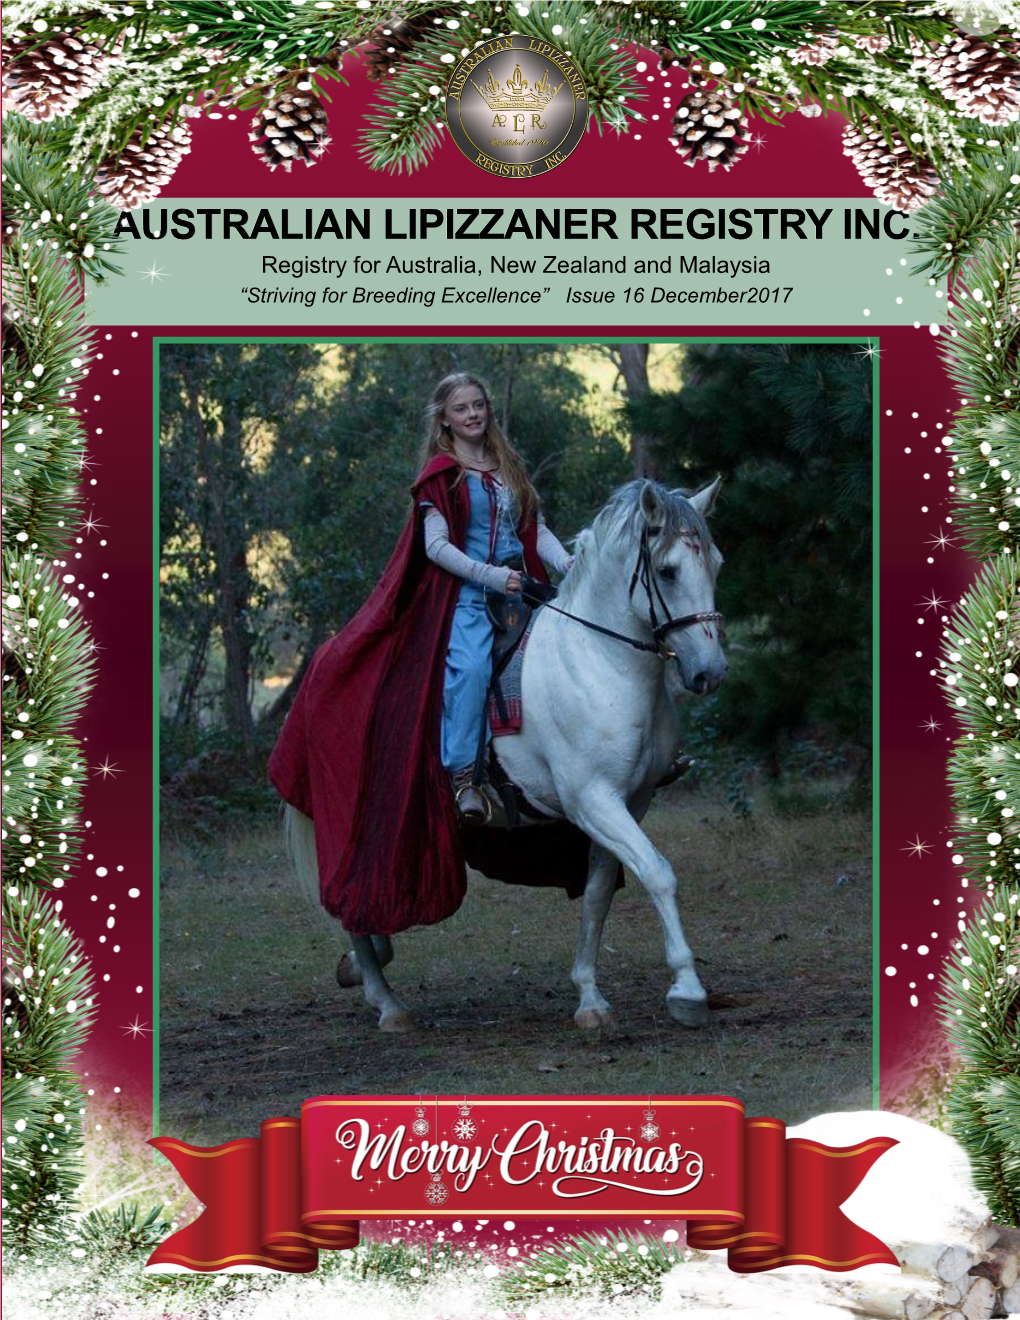 AUSTRALIAN LIPIZZANER REGISTRY INC. Registry for Australia, New Zealand and Malaysia “Striving for Breeding Excellence” Issue 16 December2017